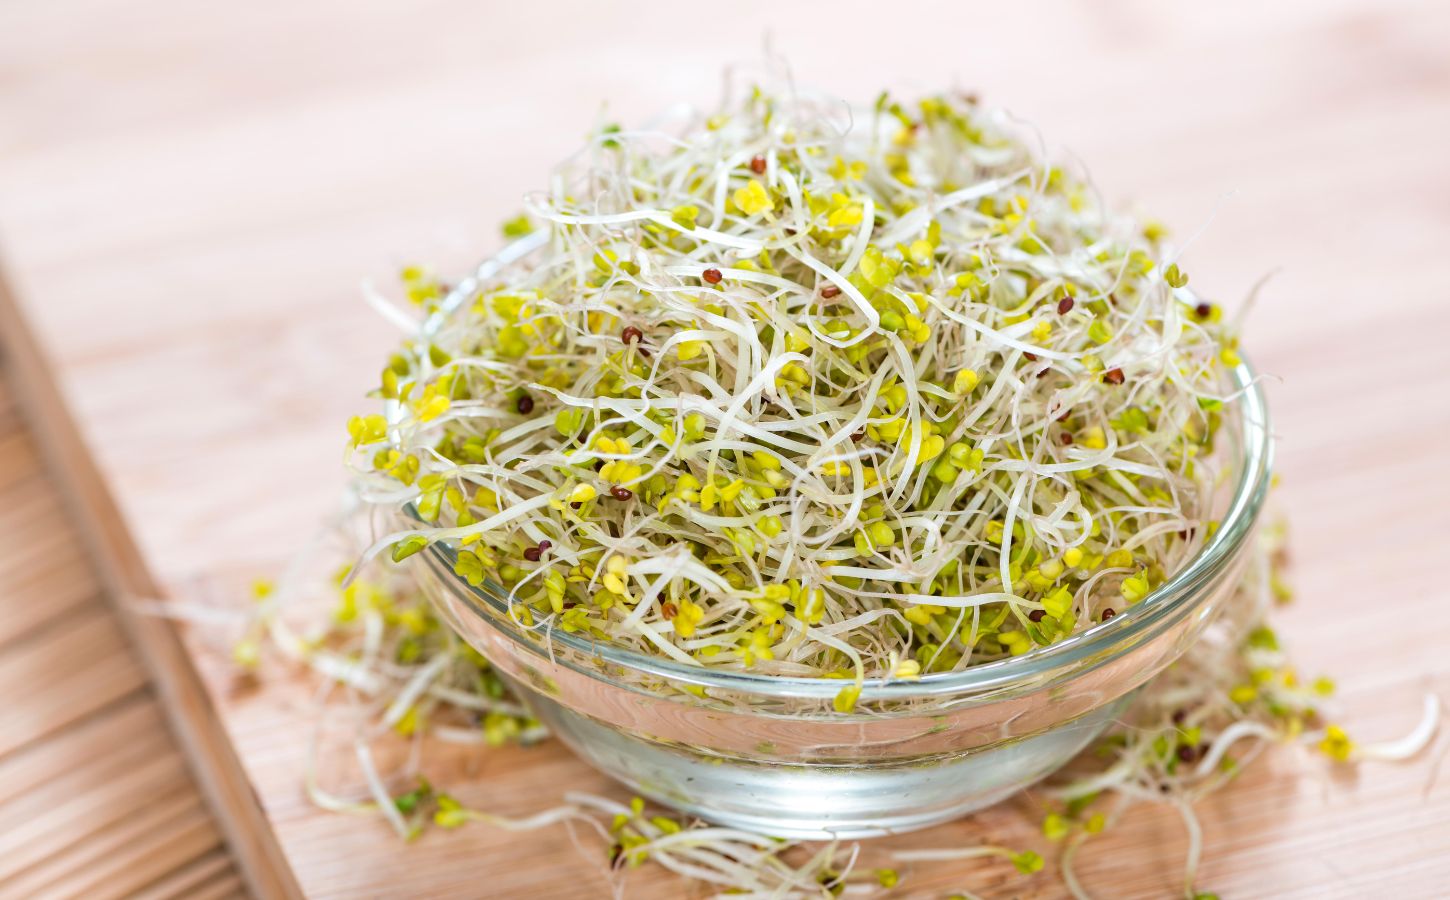 A bowl of broccoli sprouts